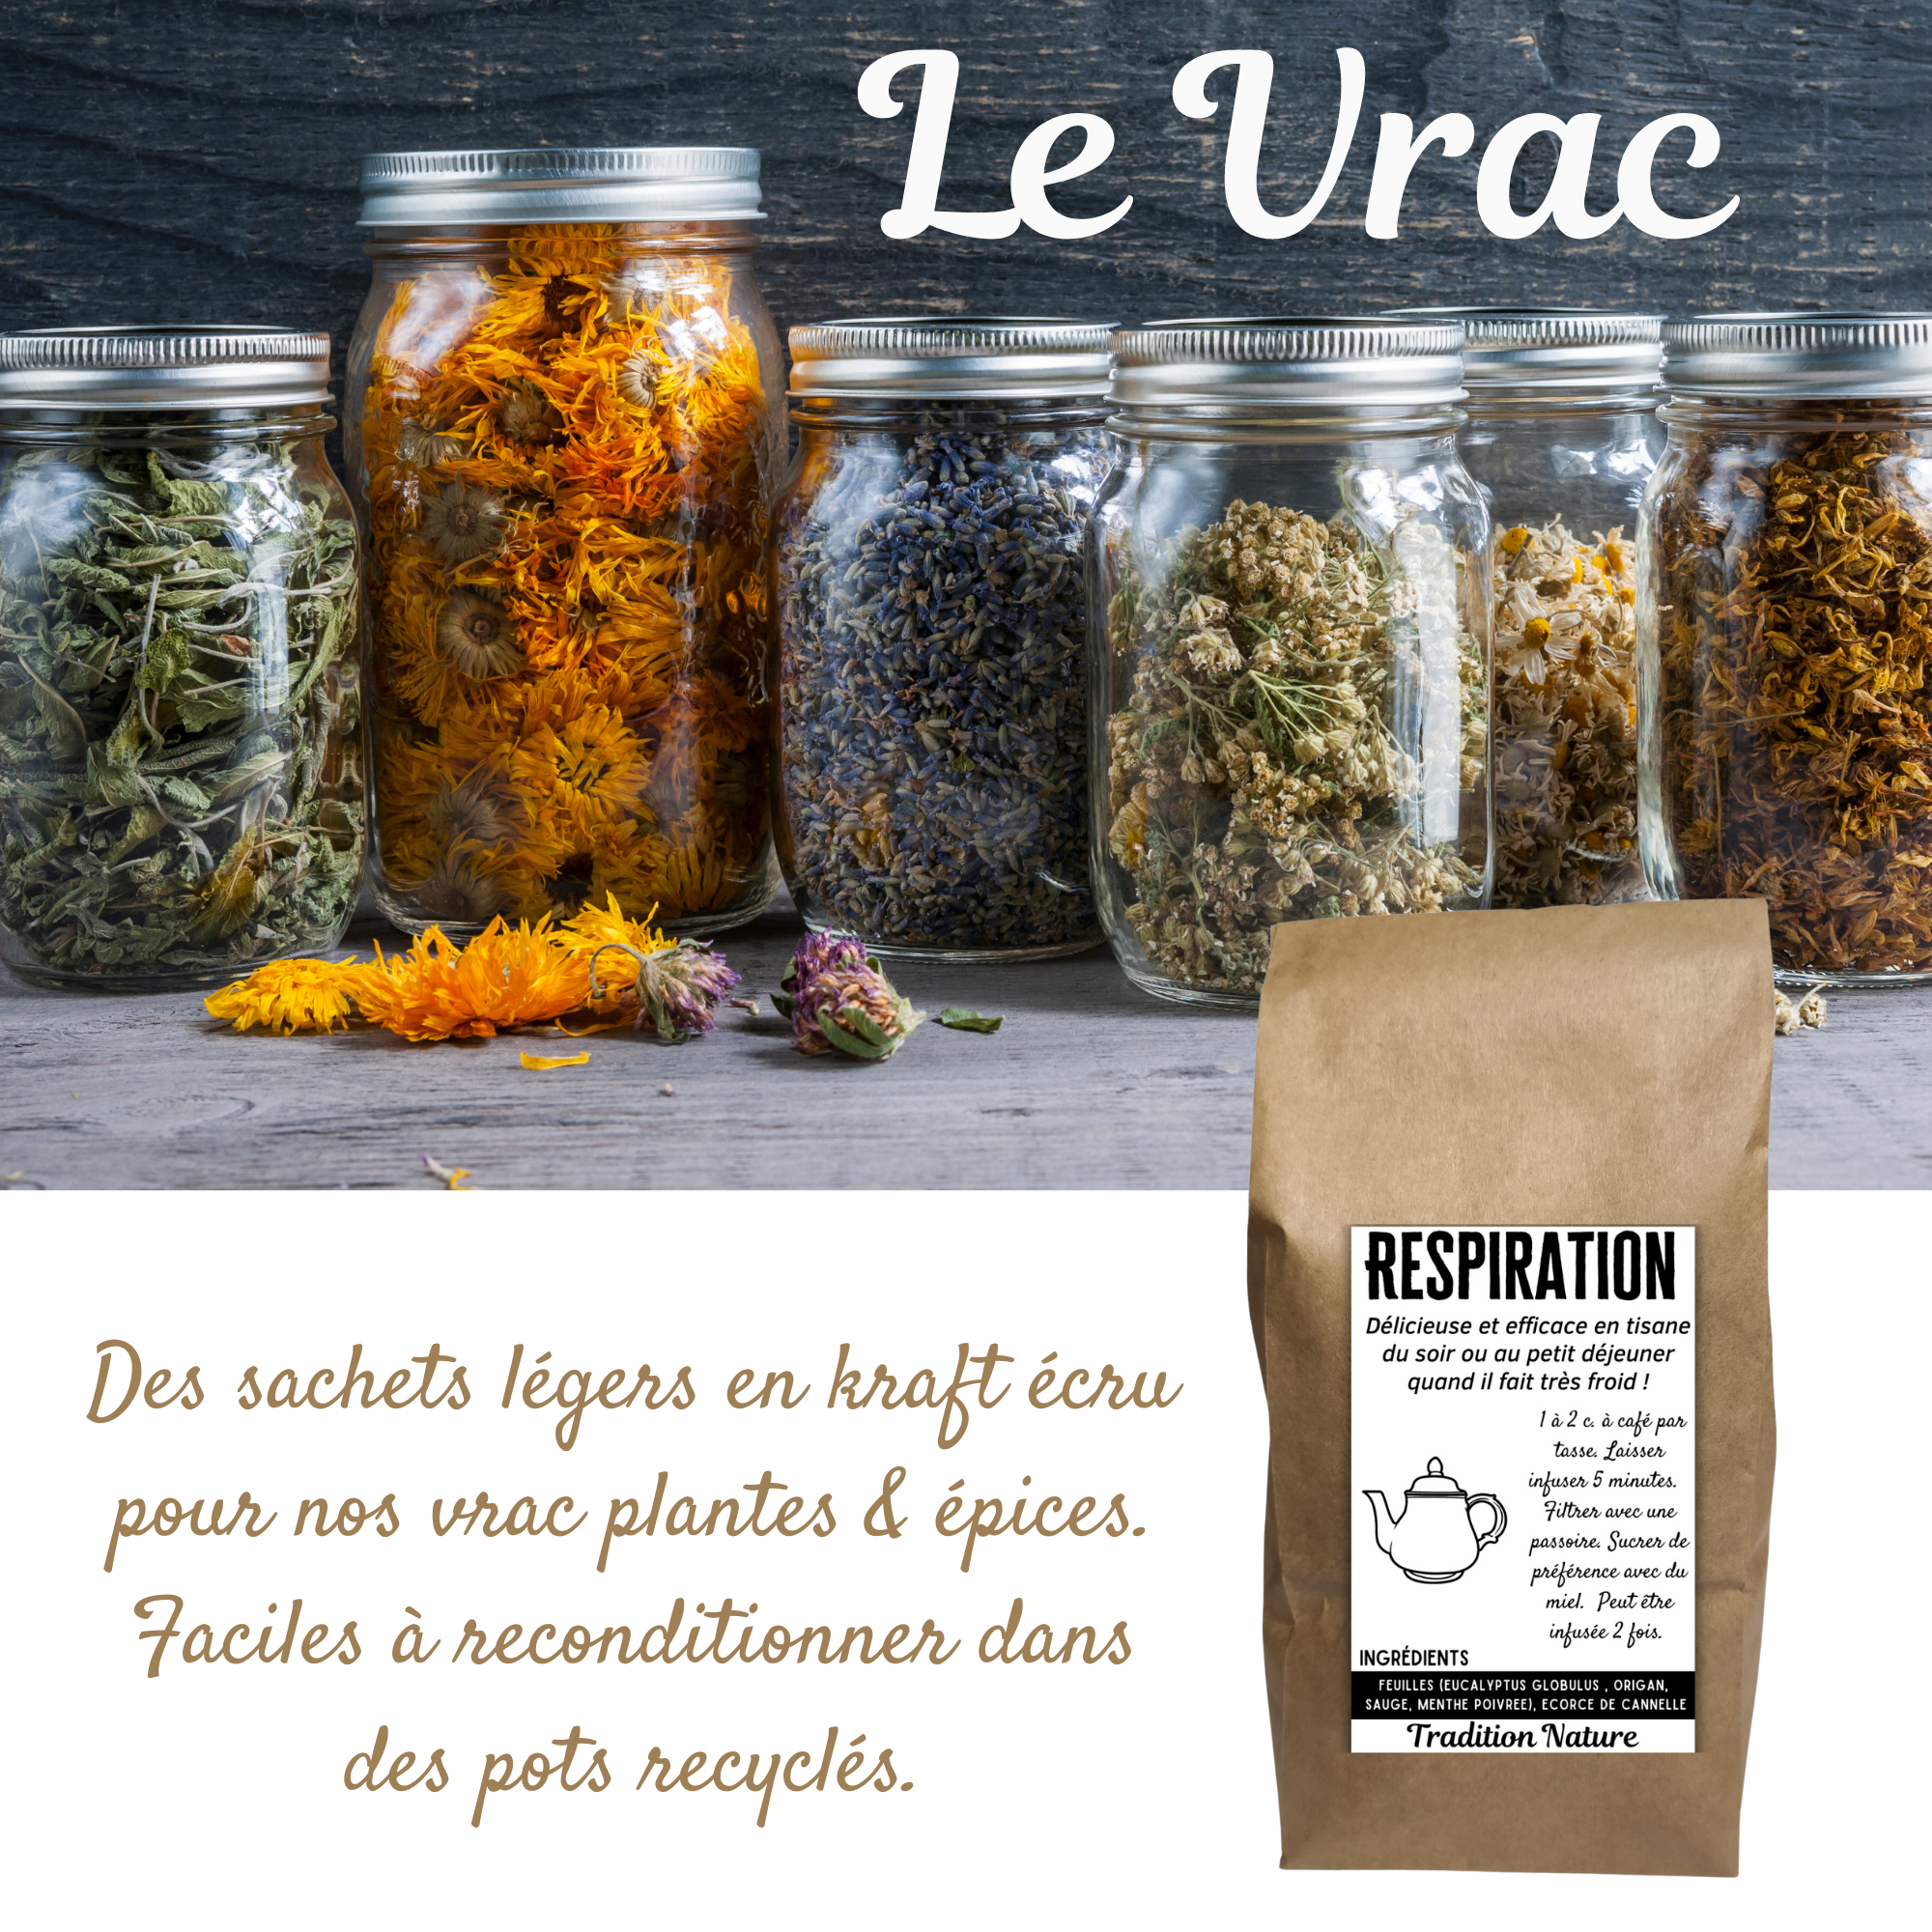 Infusion Camomille vrac